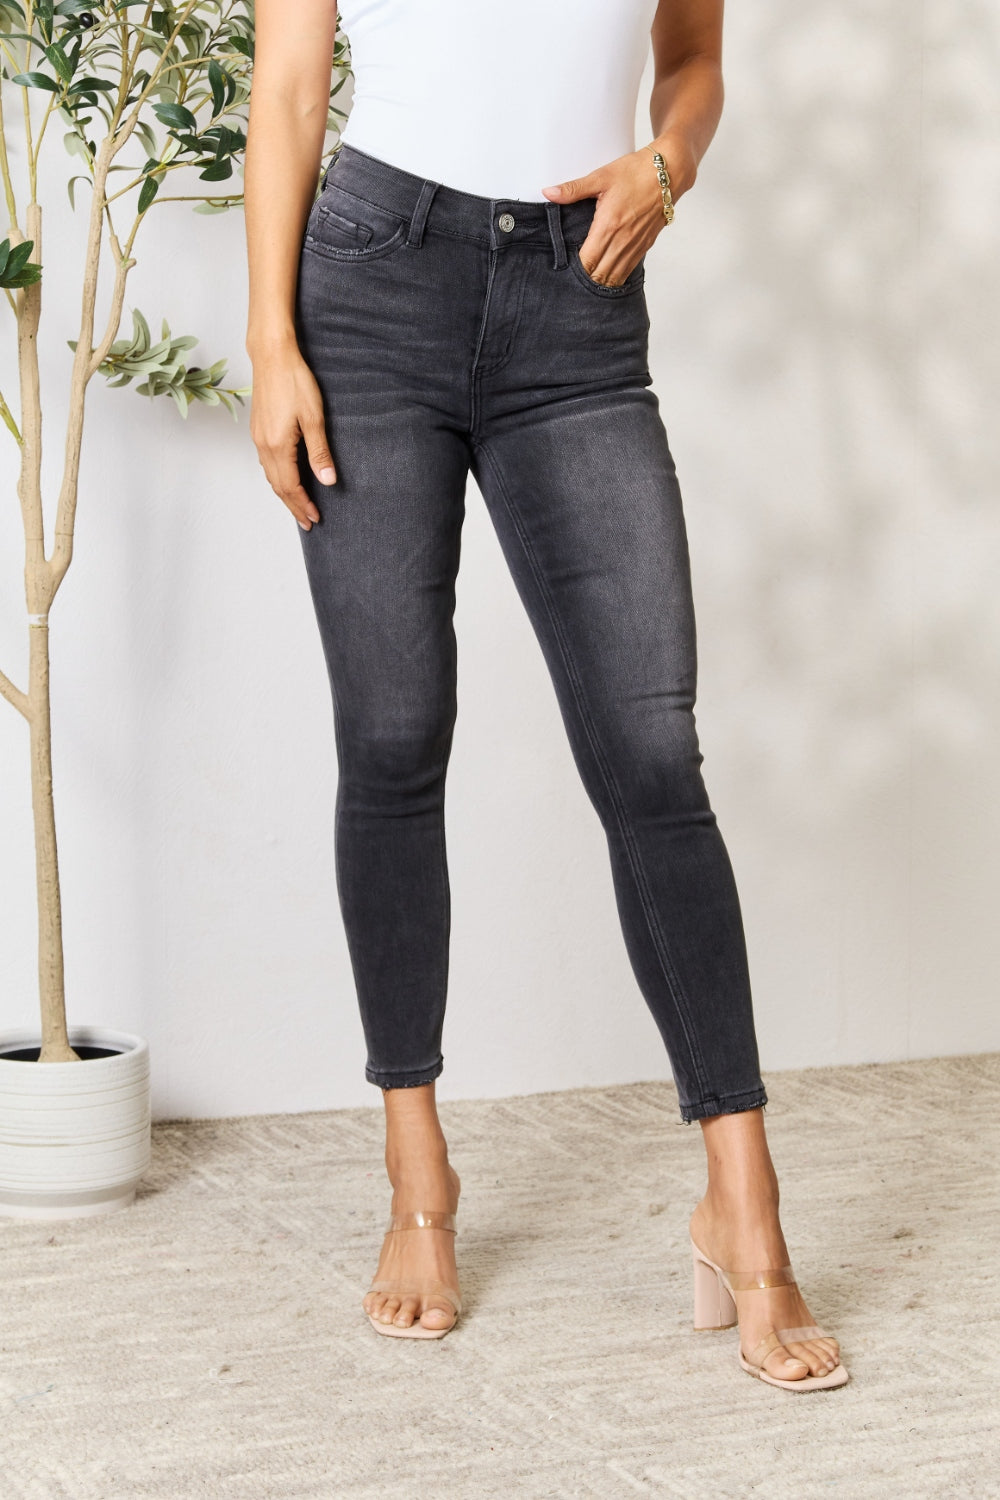 BAYEAS Cropped Skinny Jeans - SELFTRITSS